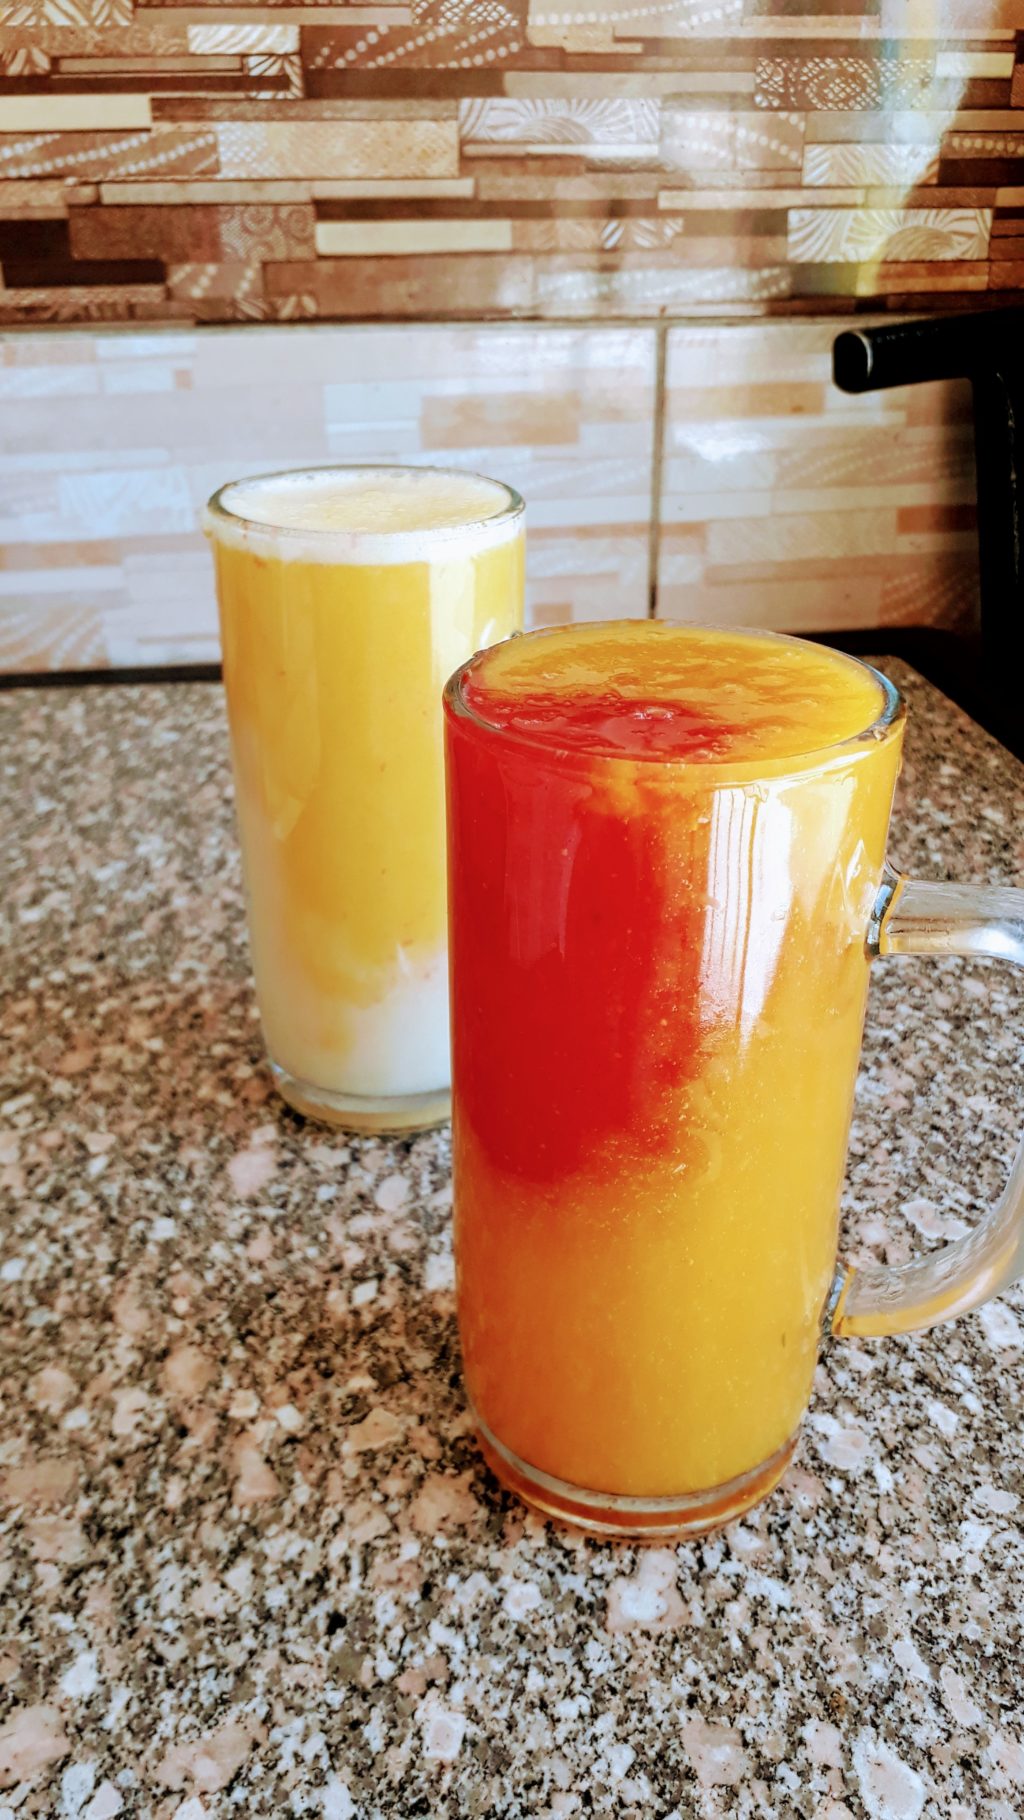 Mixed Juices